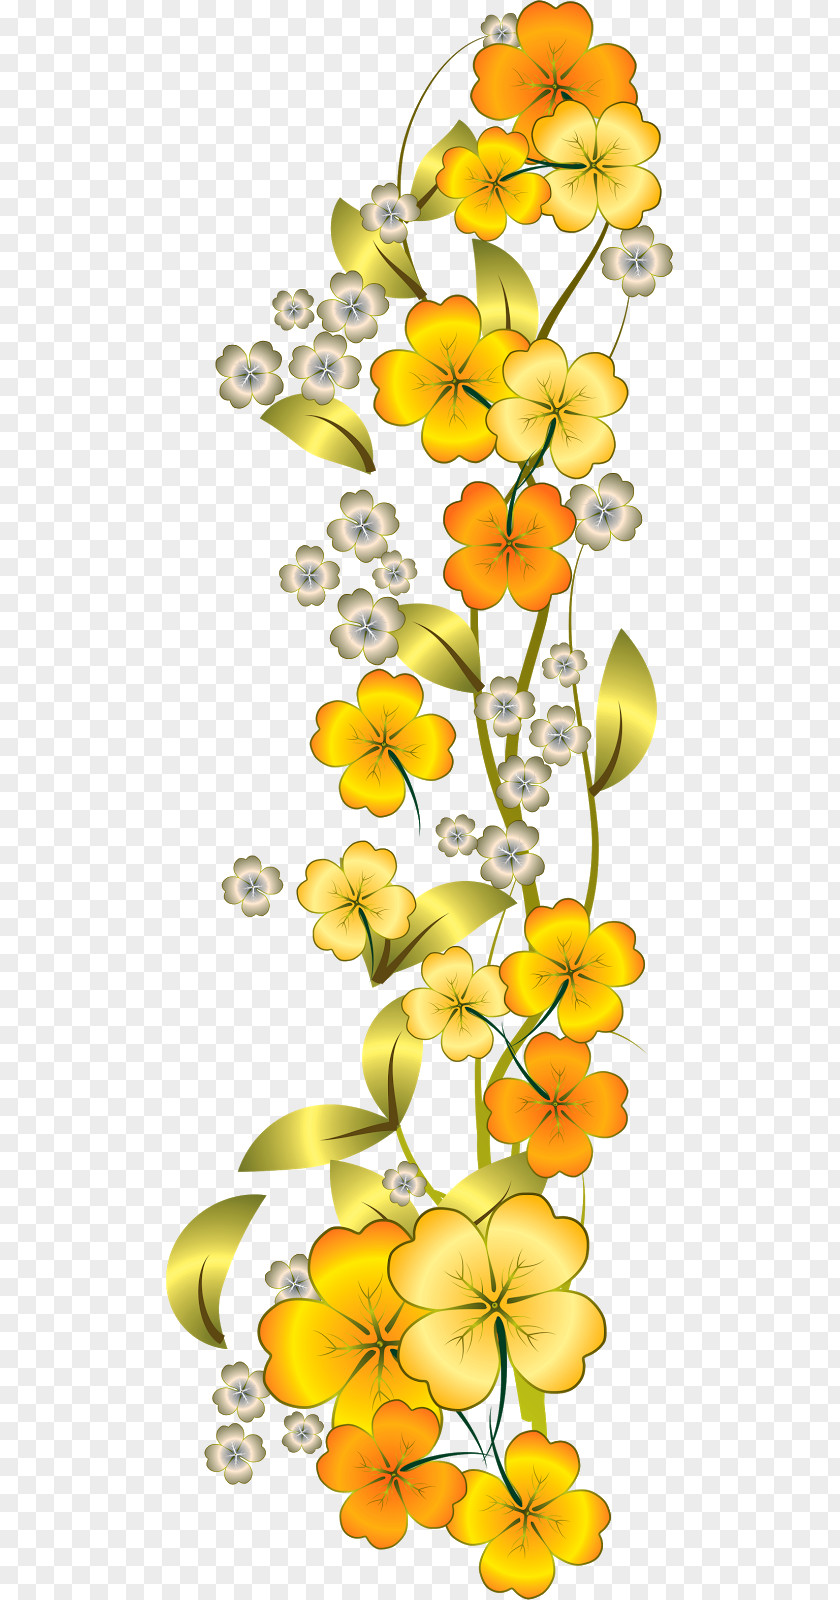 Flower Clip Art Yellow Image PNG